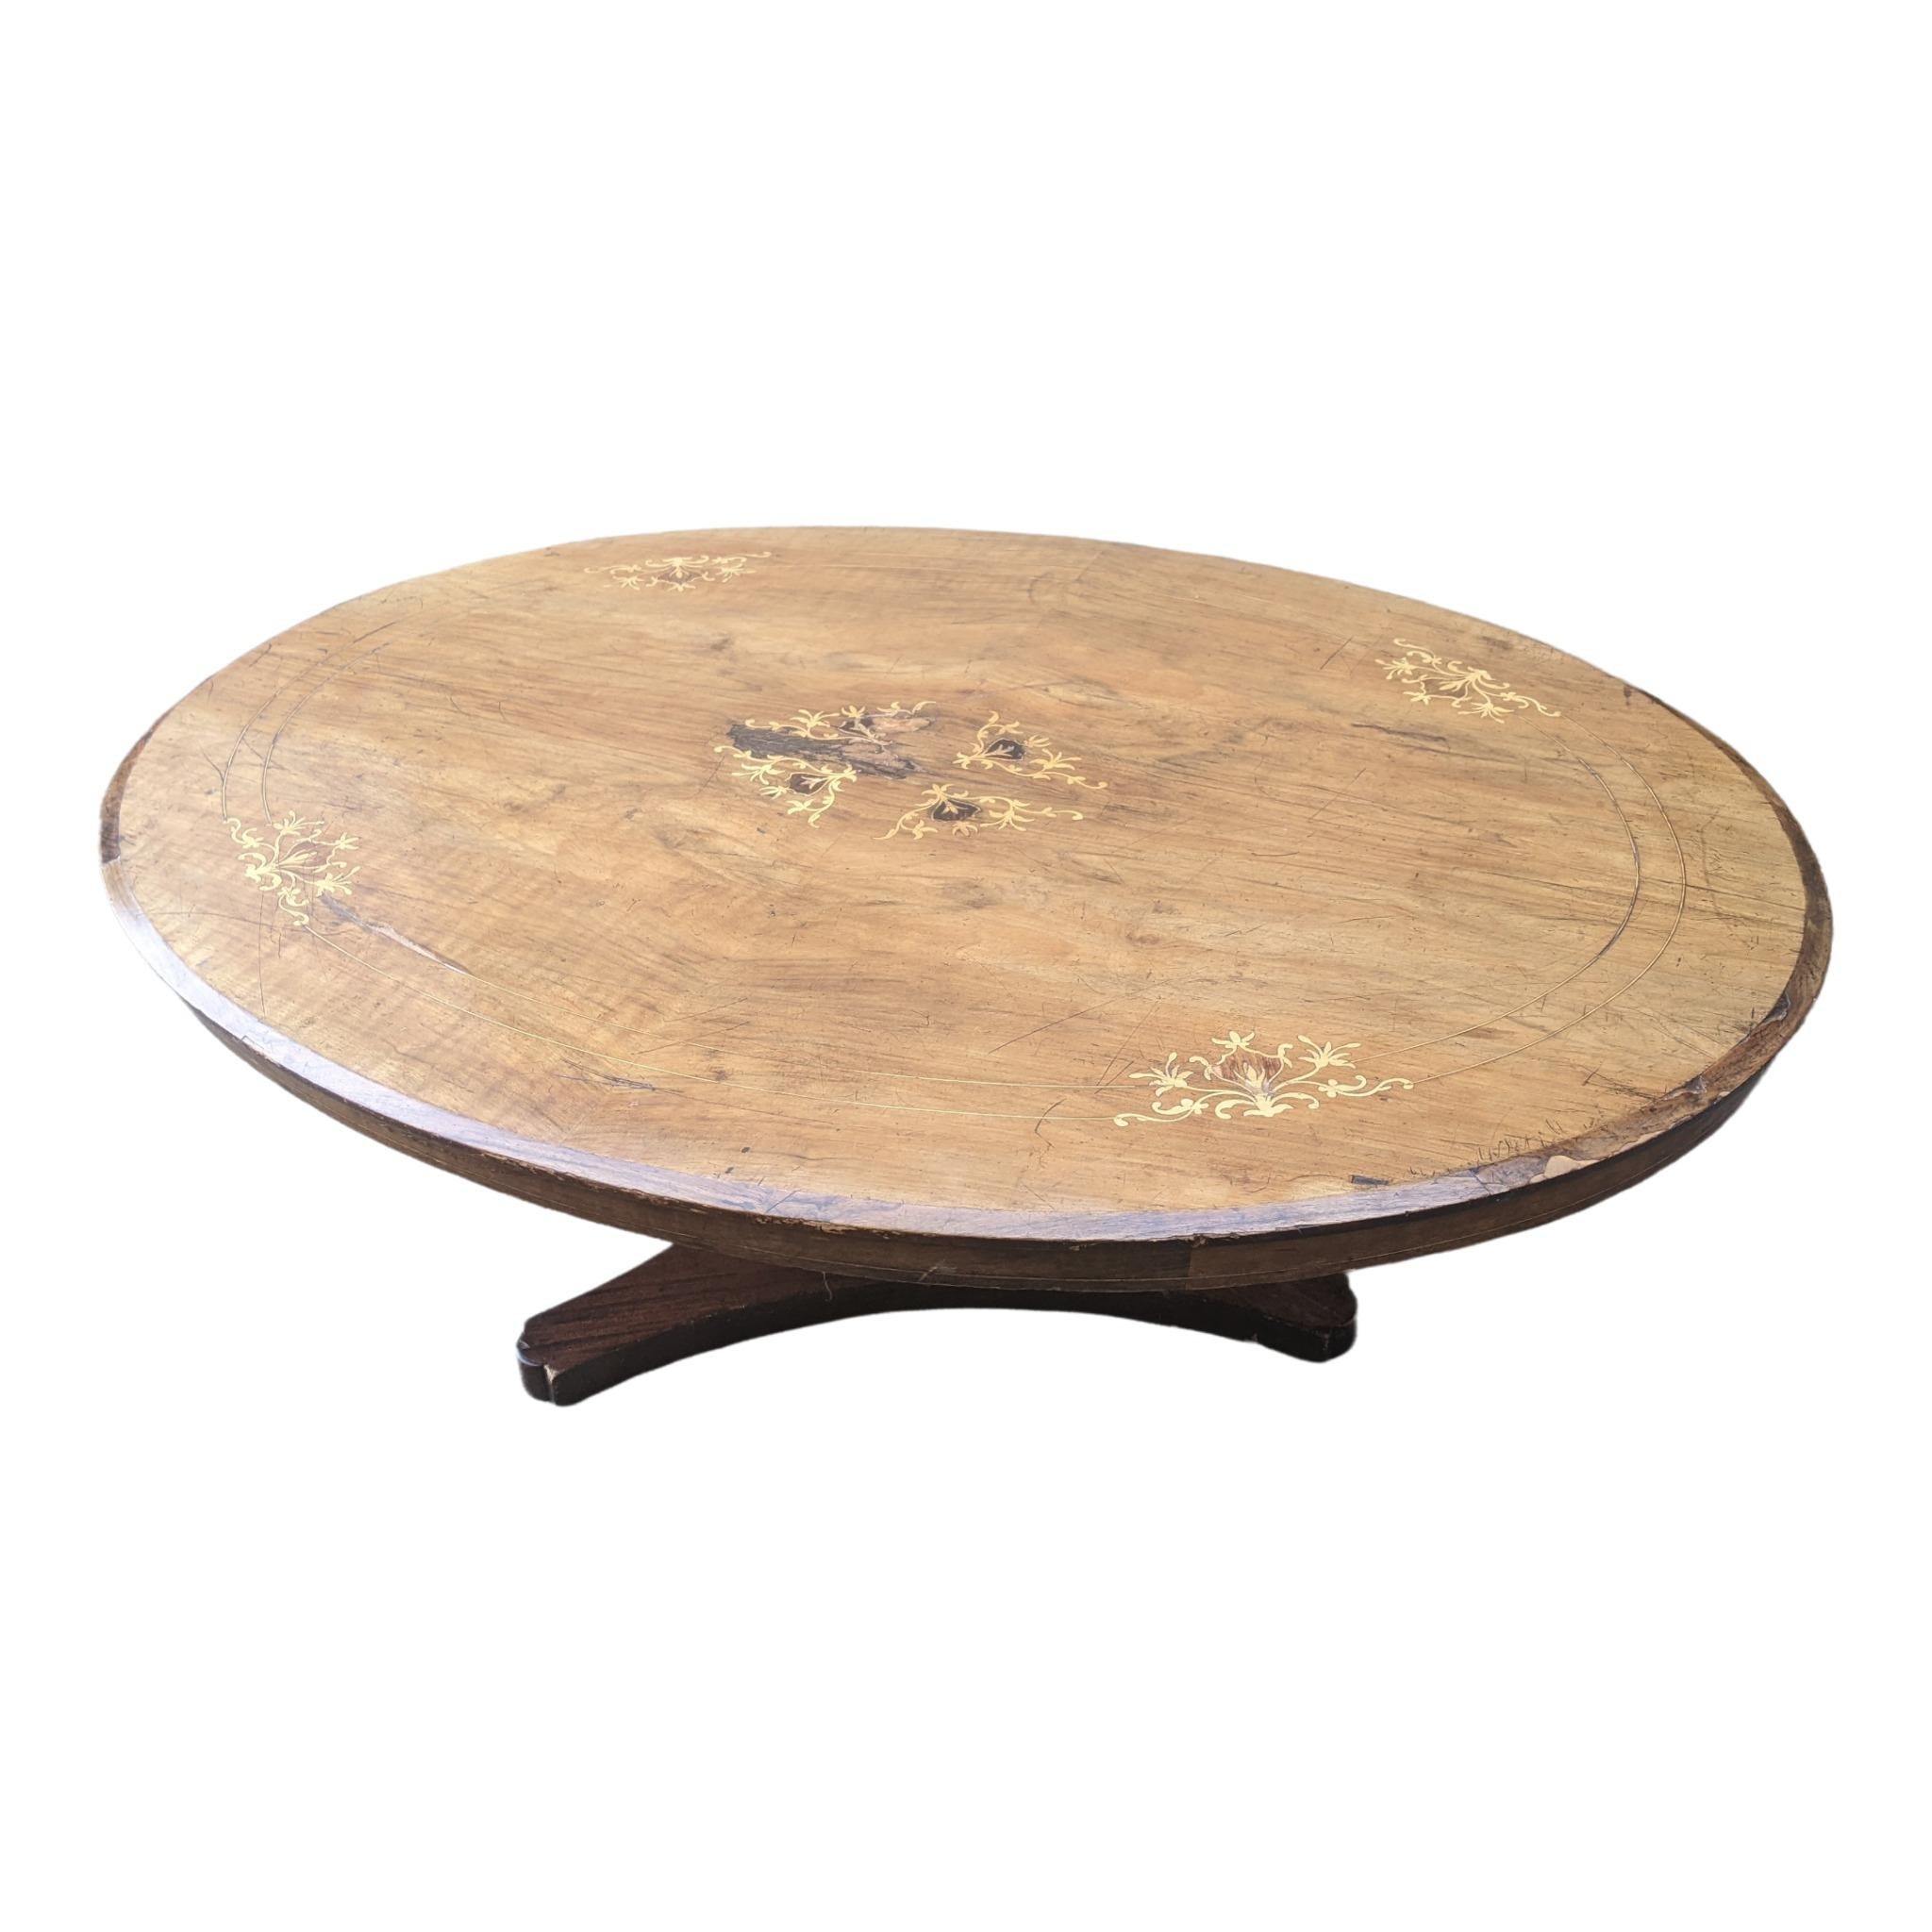 Late 19th Century Antique Hybridized Inlaid Victorian and Empire Coffee Table For Sale 5